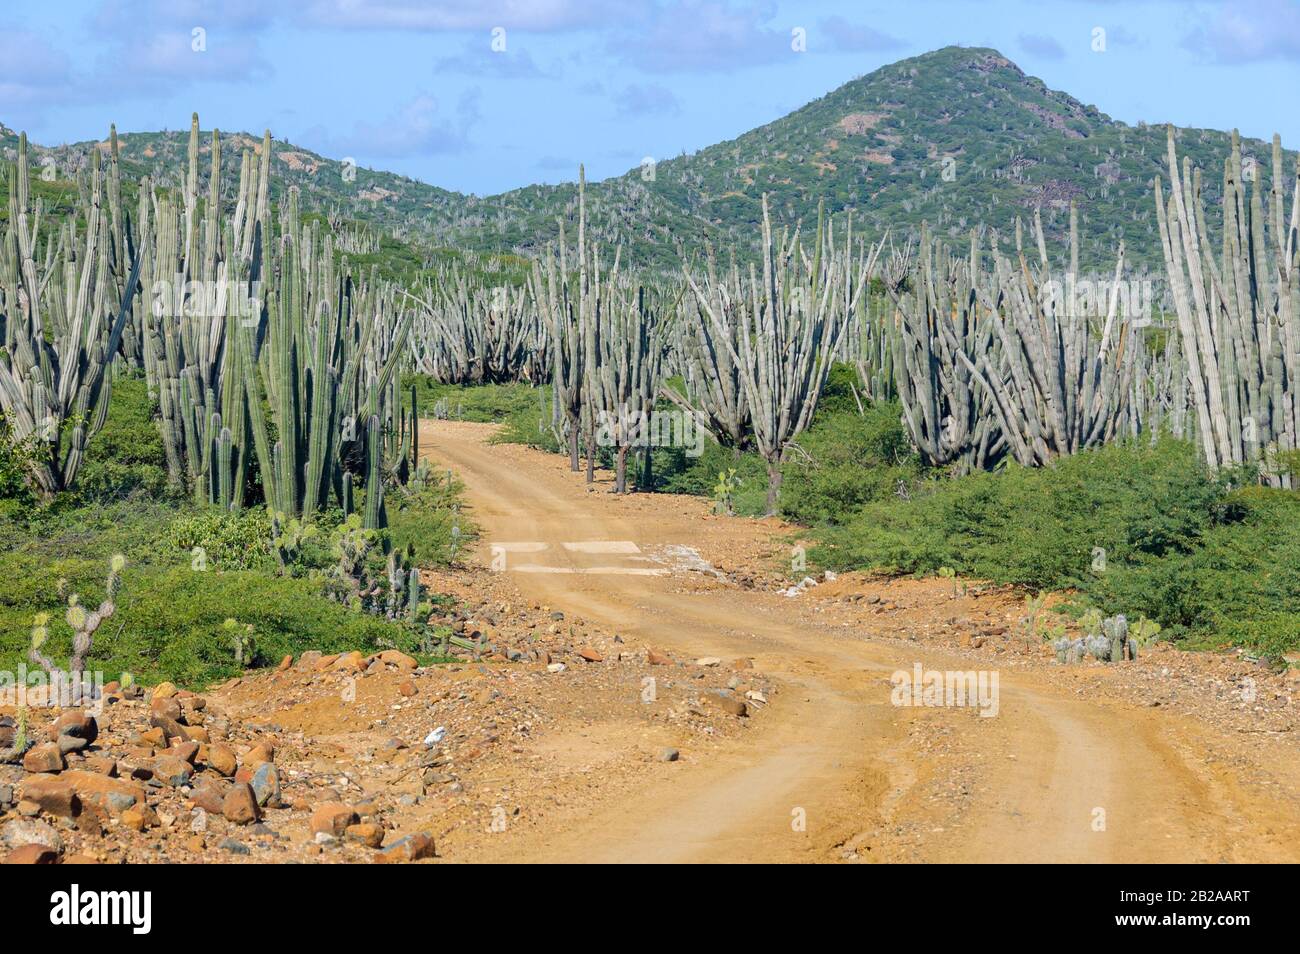 A dirt road winds itself through many tall growing kadushi cacti on the tropical island Bonaire in the Caribbean. The hills of Washington Slagbaai Nat Stock Photo